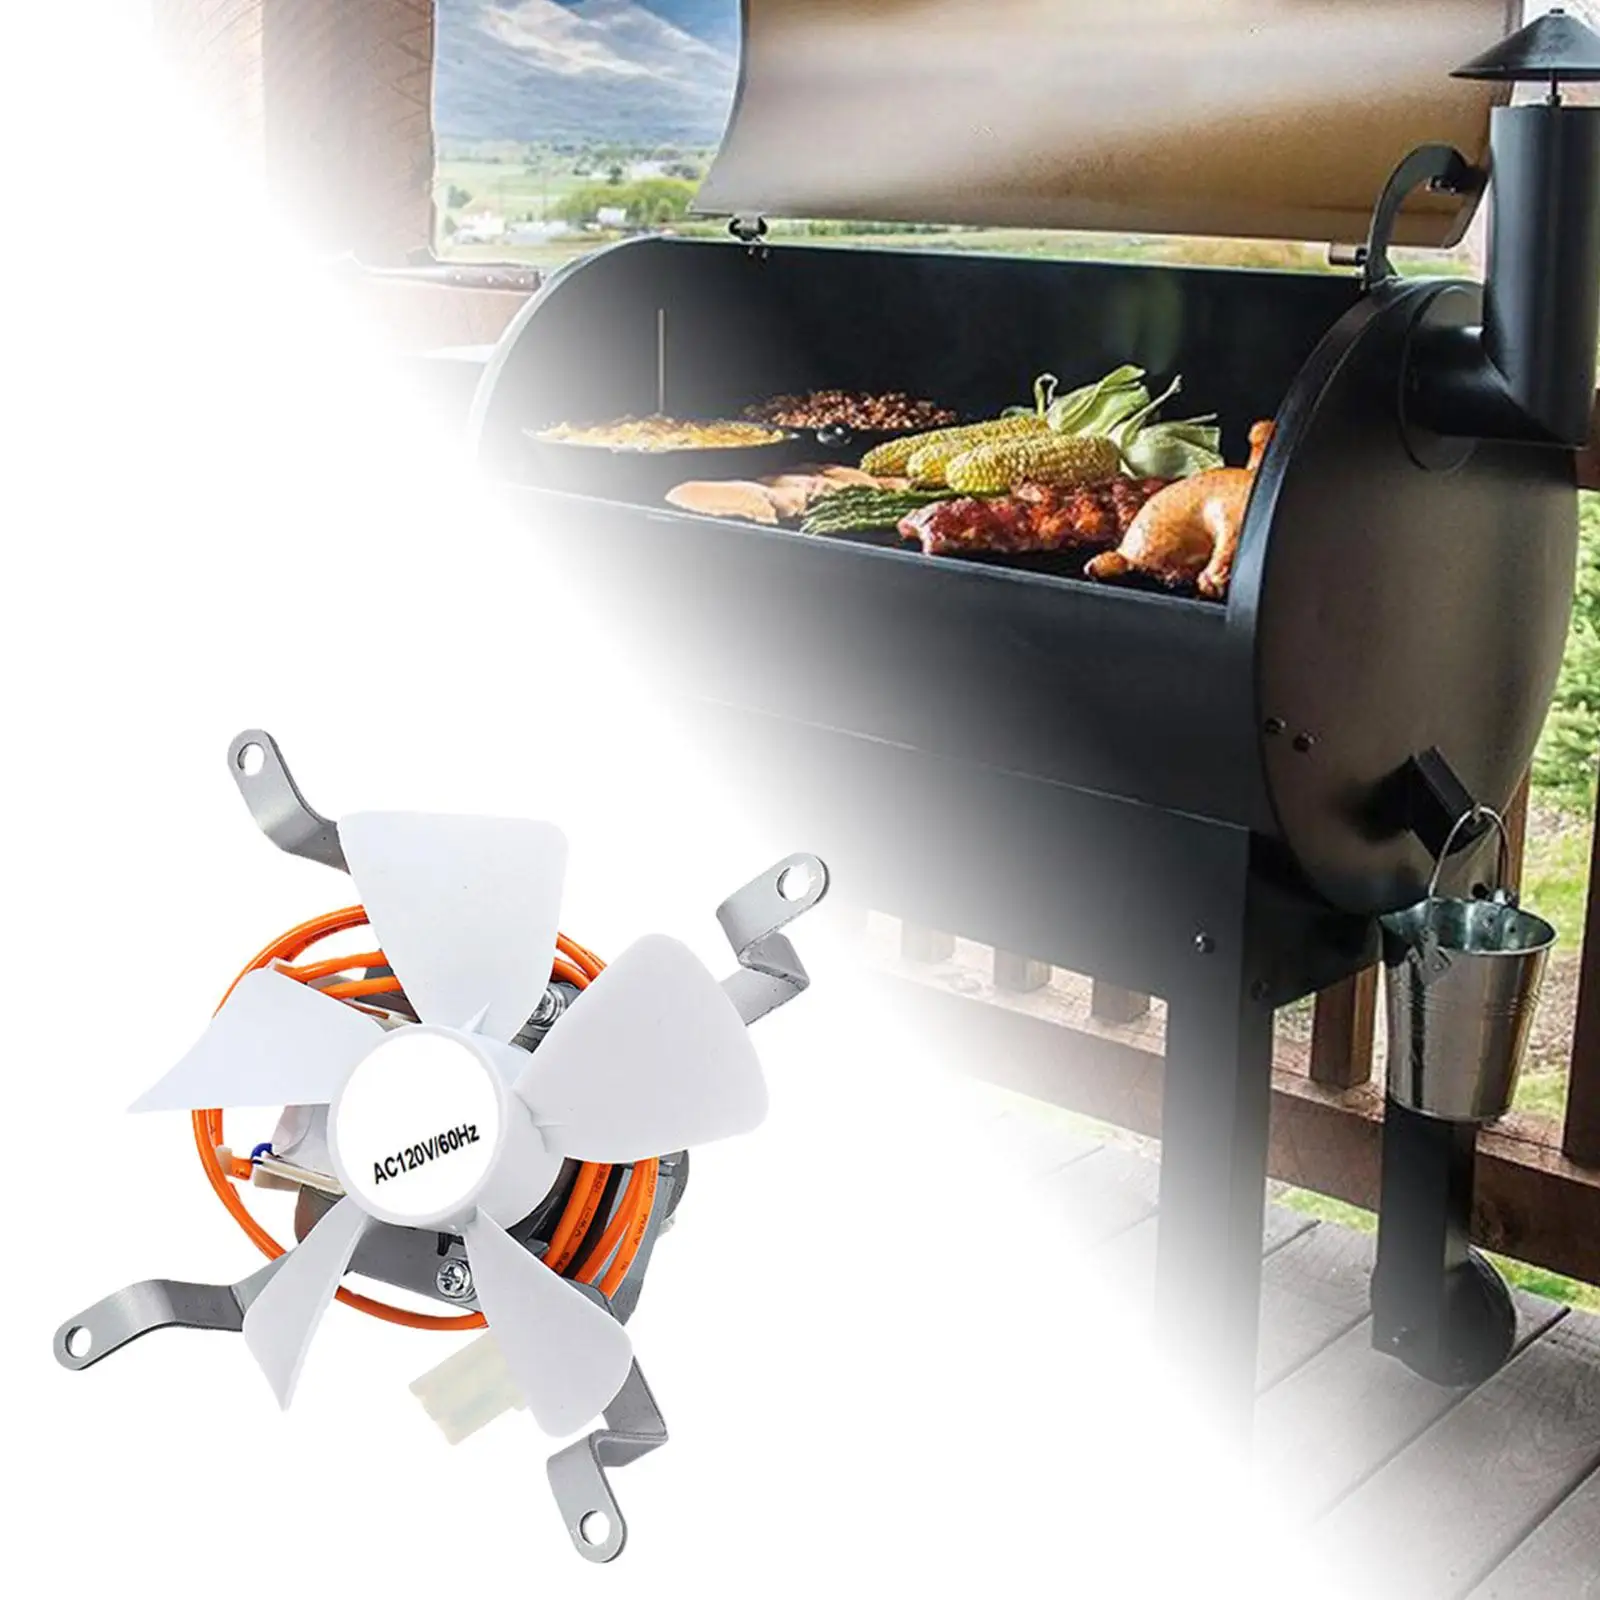 Grill Induction Fan Heavy Duty Easy to Install Low Noise Combustion Fan Motor for Wooden Pellet Grills Replacement Accessories